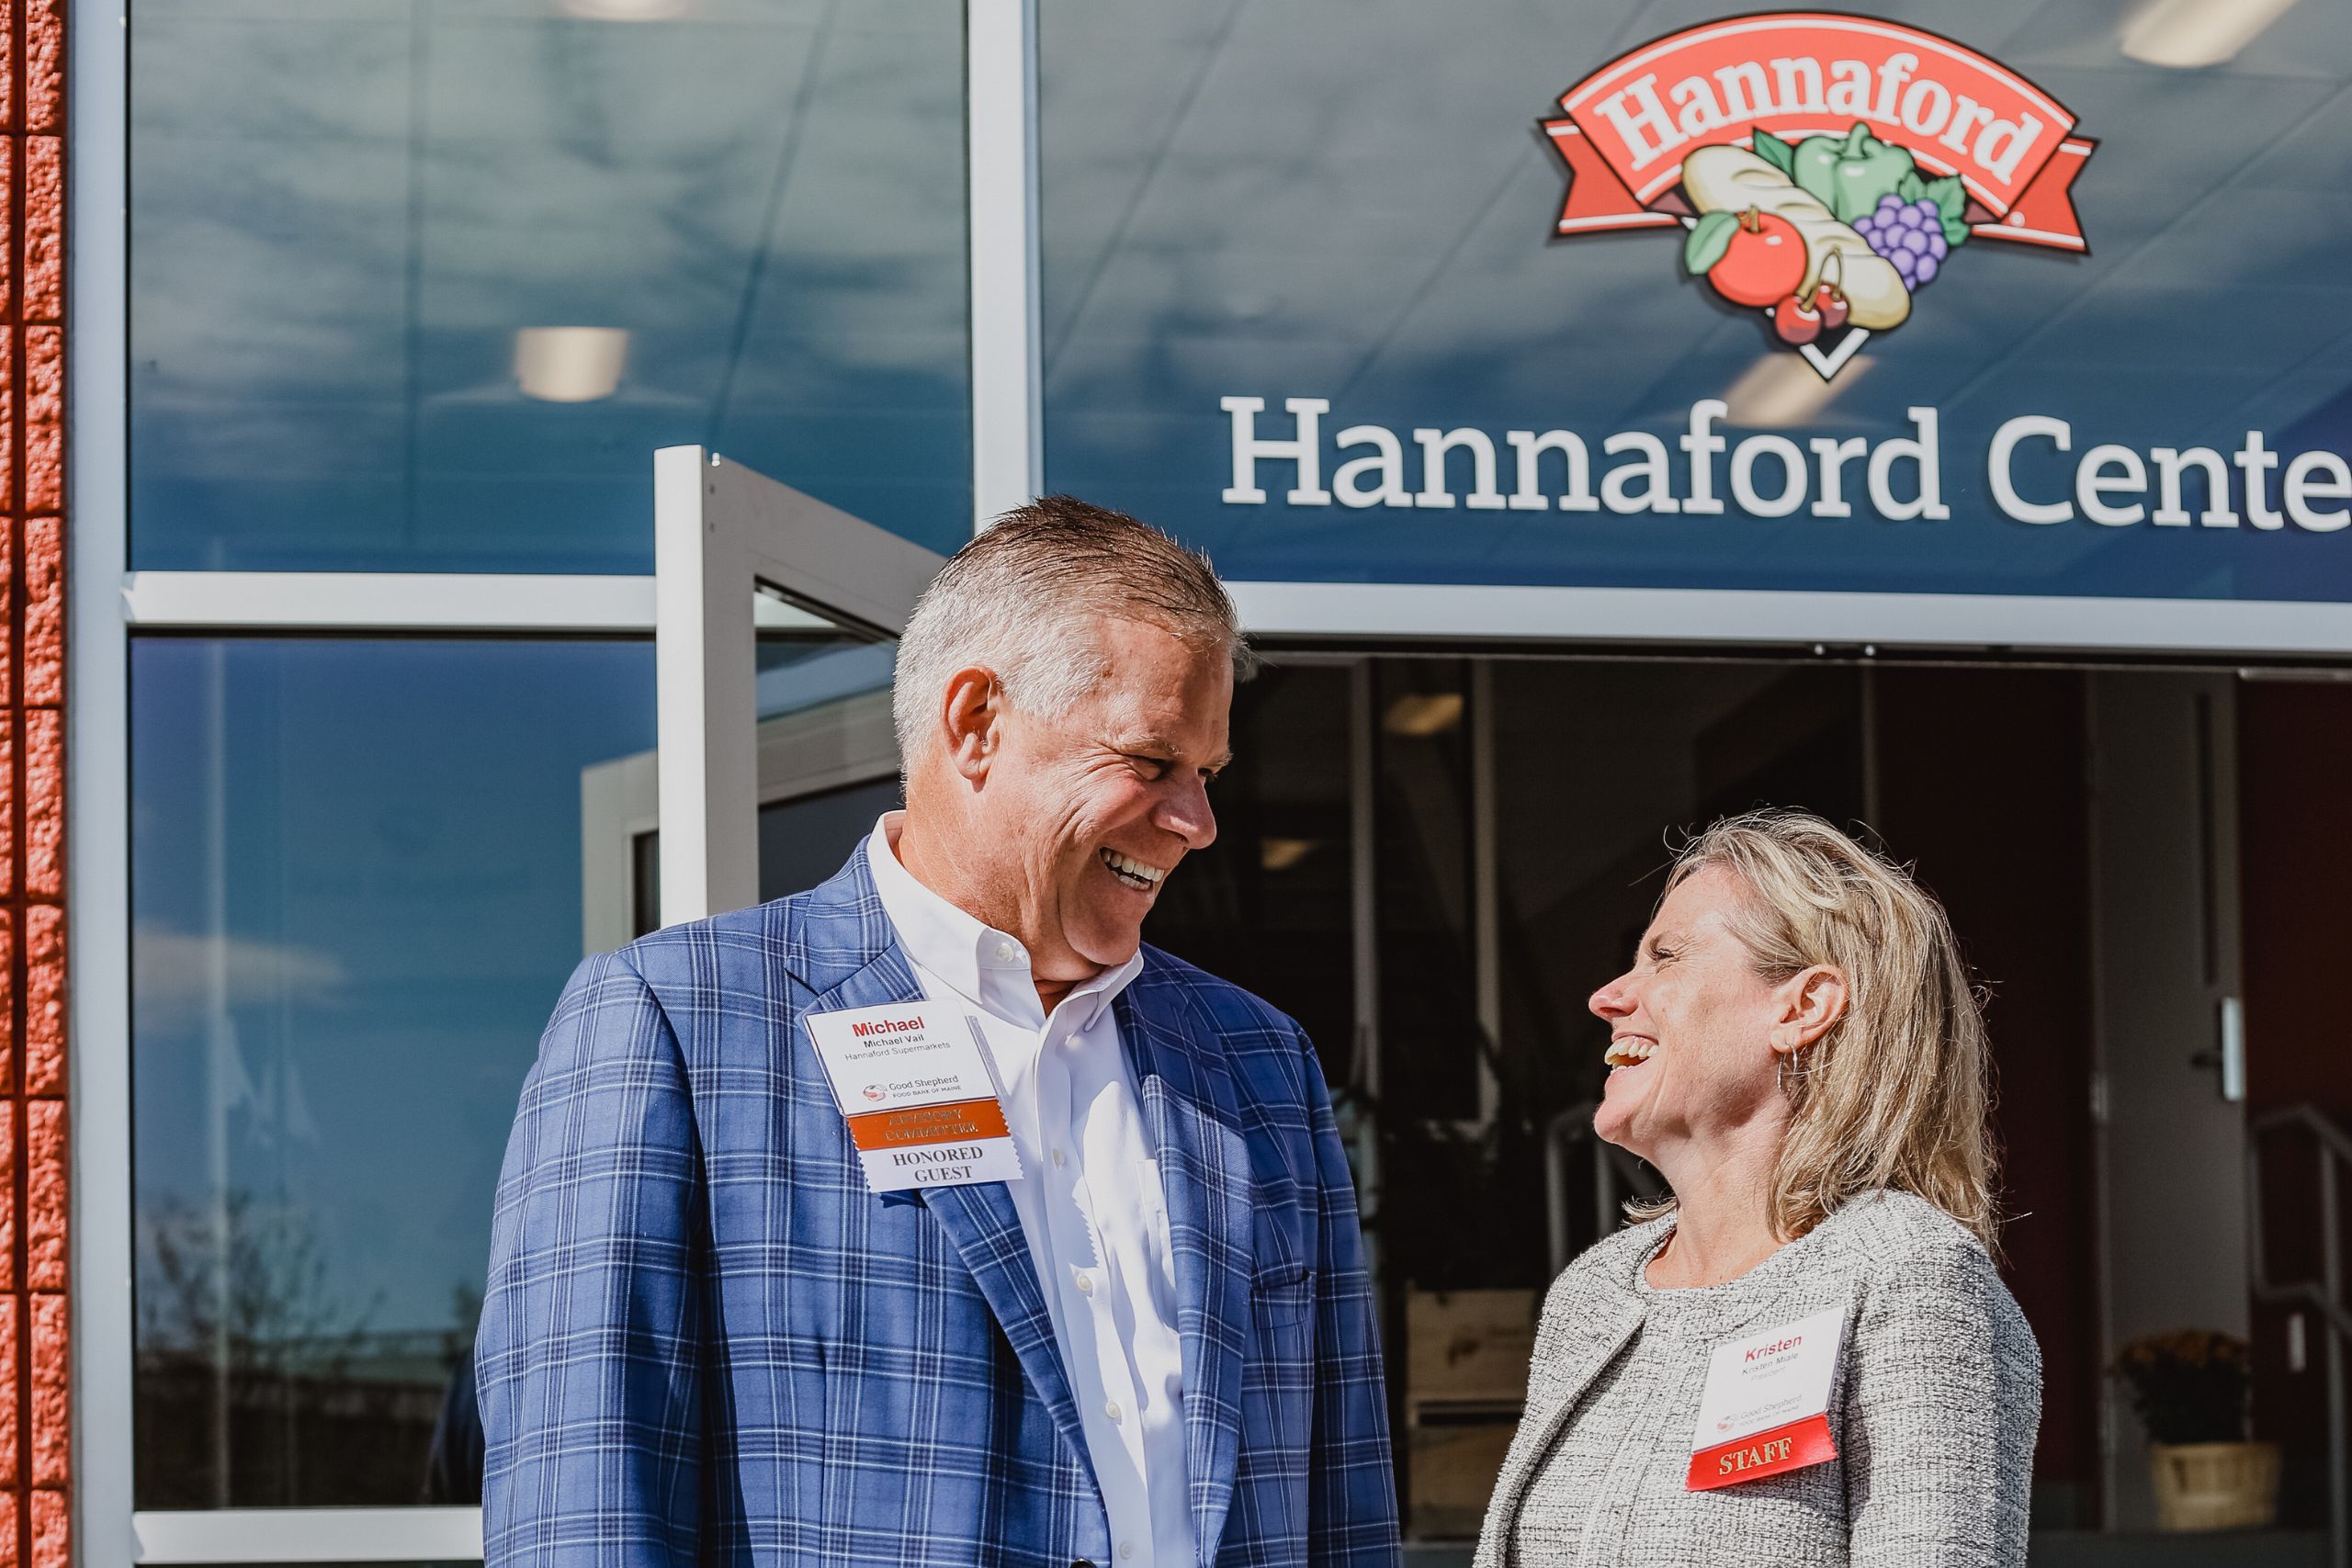 Photo of Hannaford executive smiling at eachother